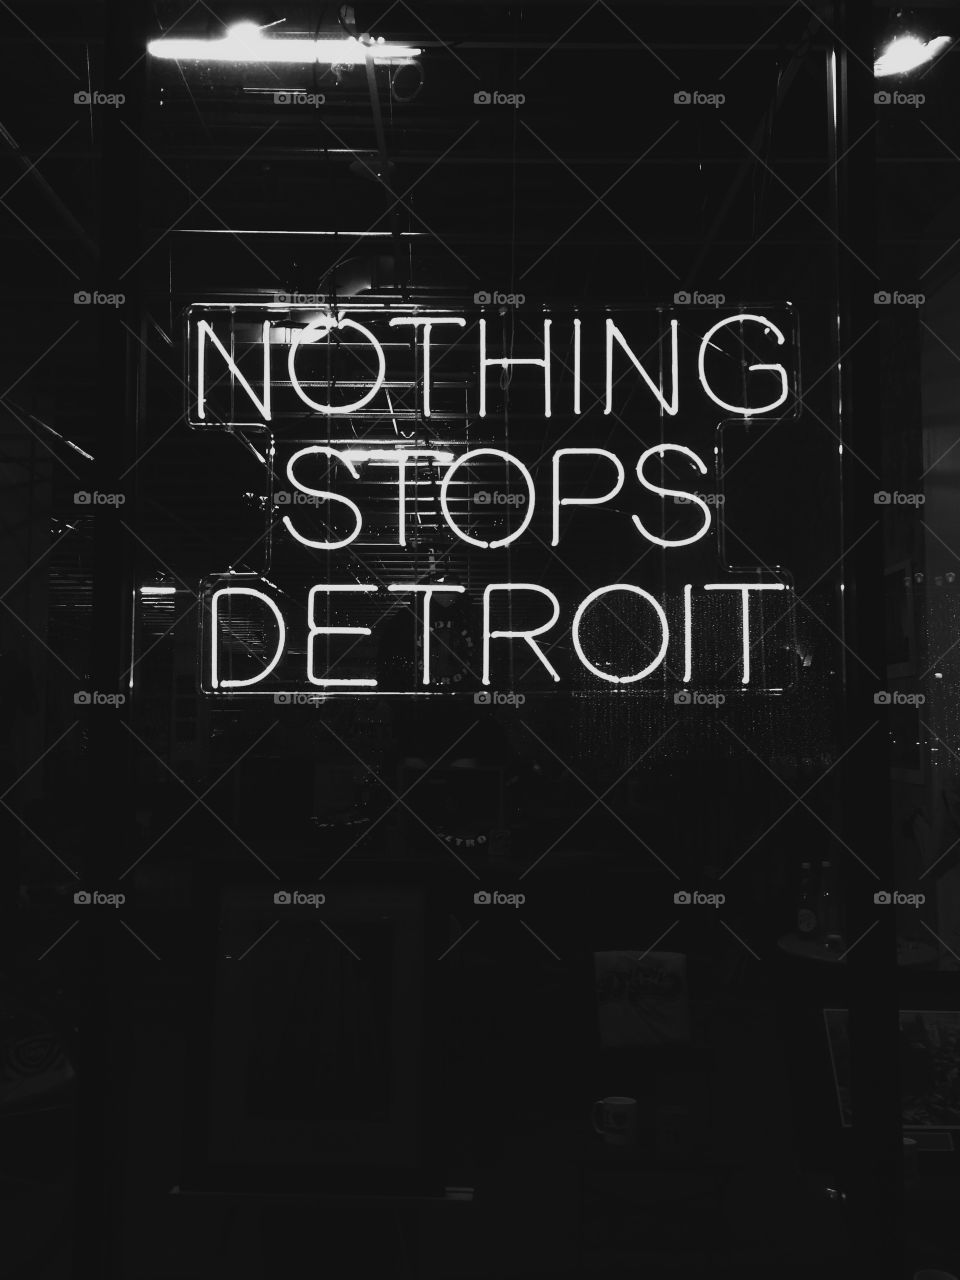 Nothing stops Detroit 